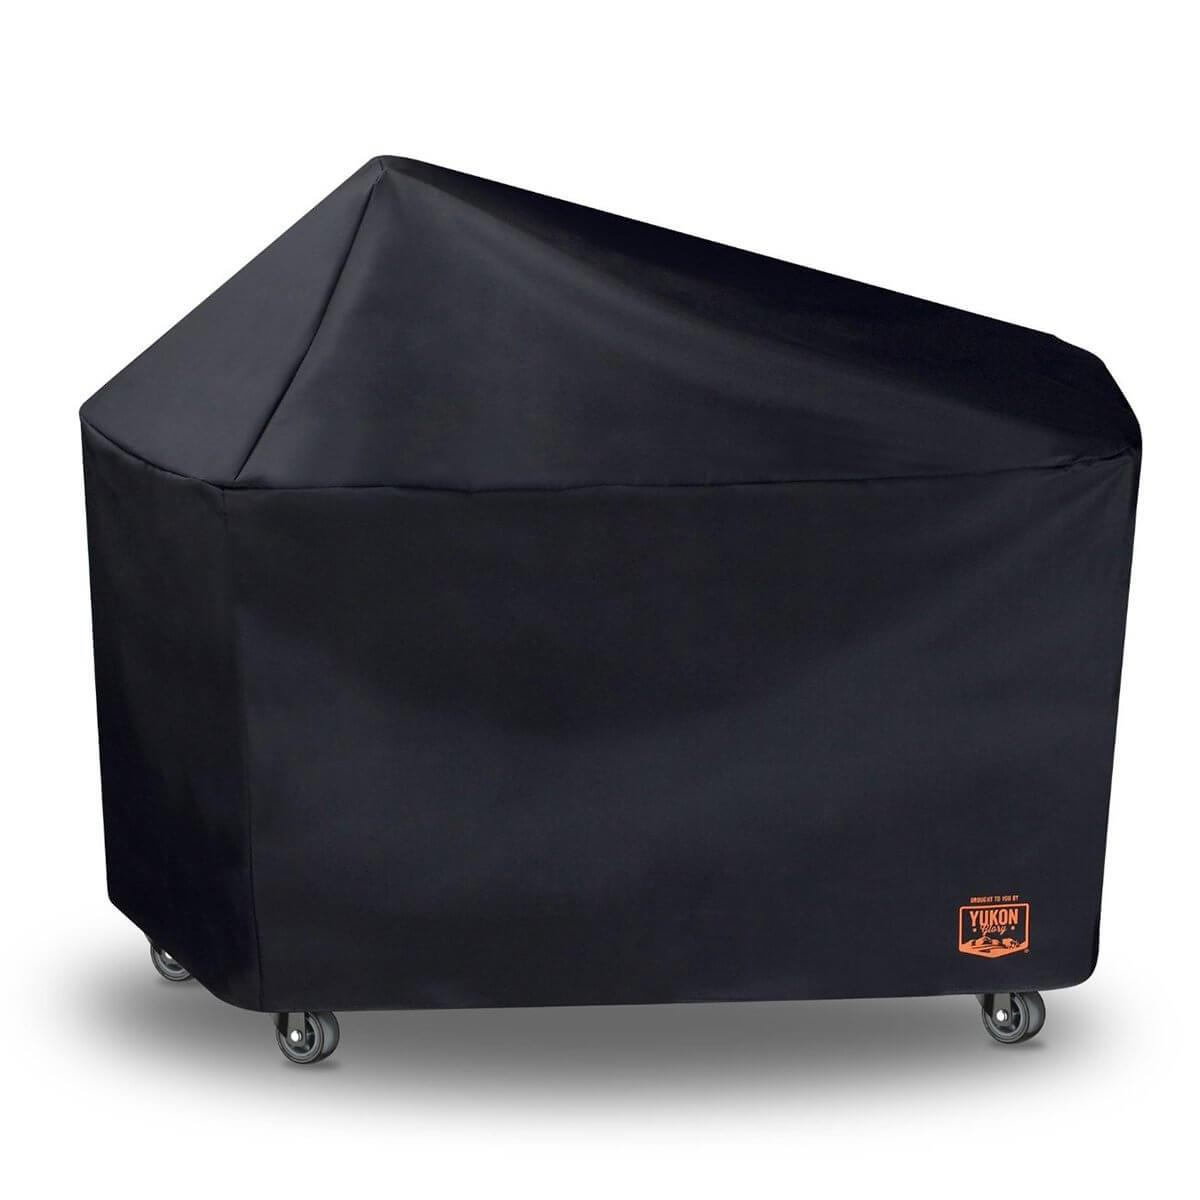 7152 Grill Cover for 22" Weber Performer Charcoal Grills